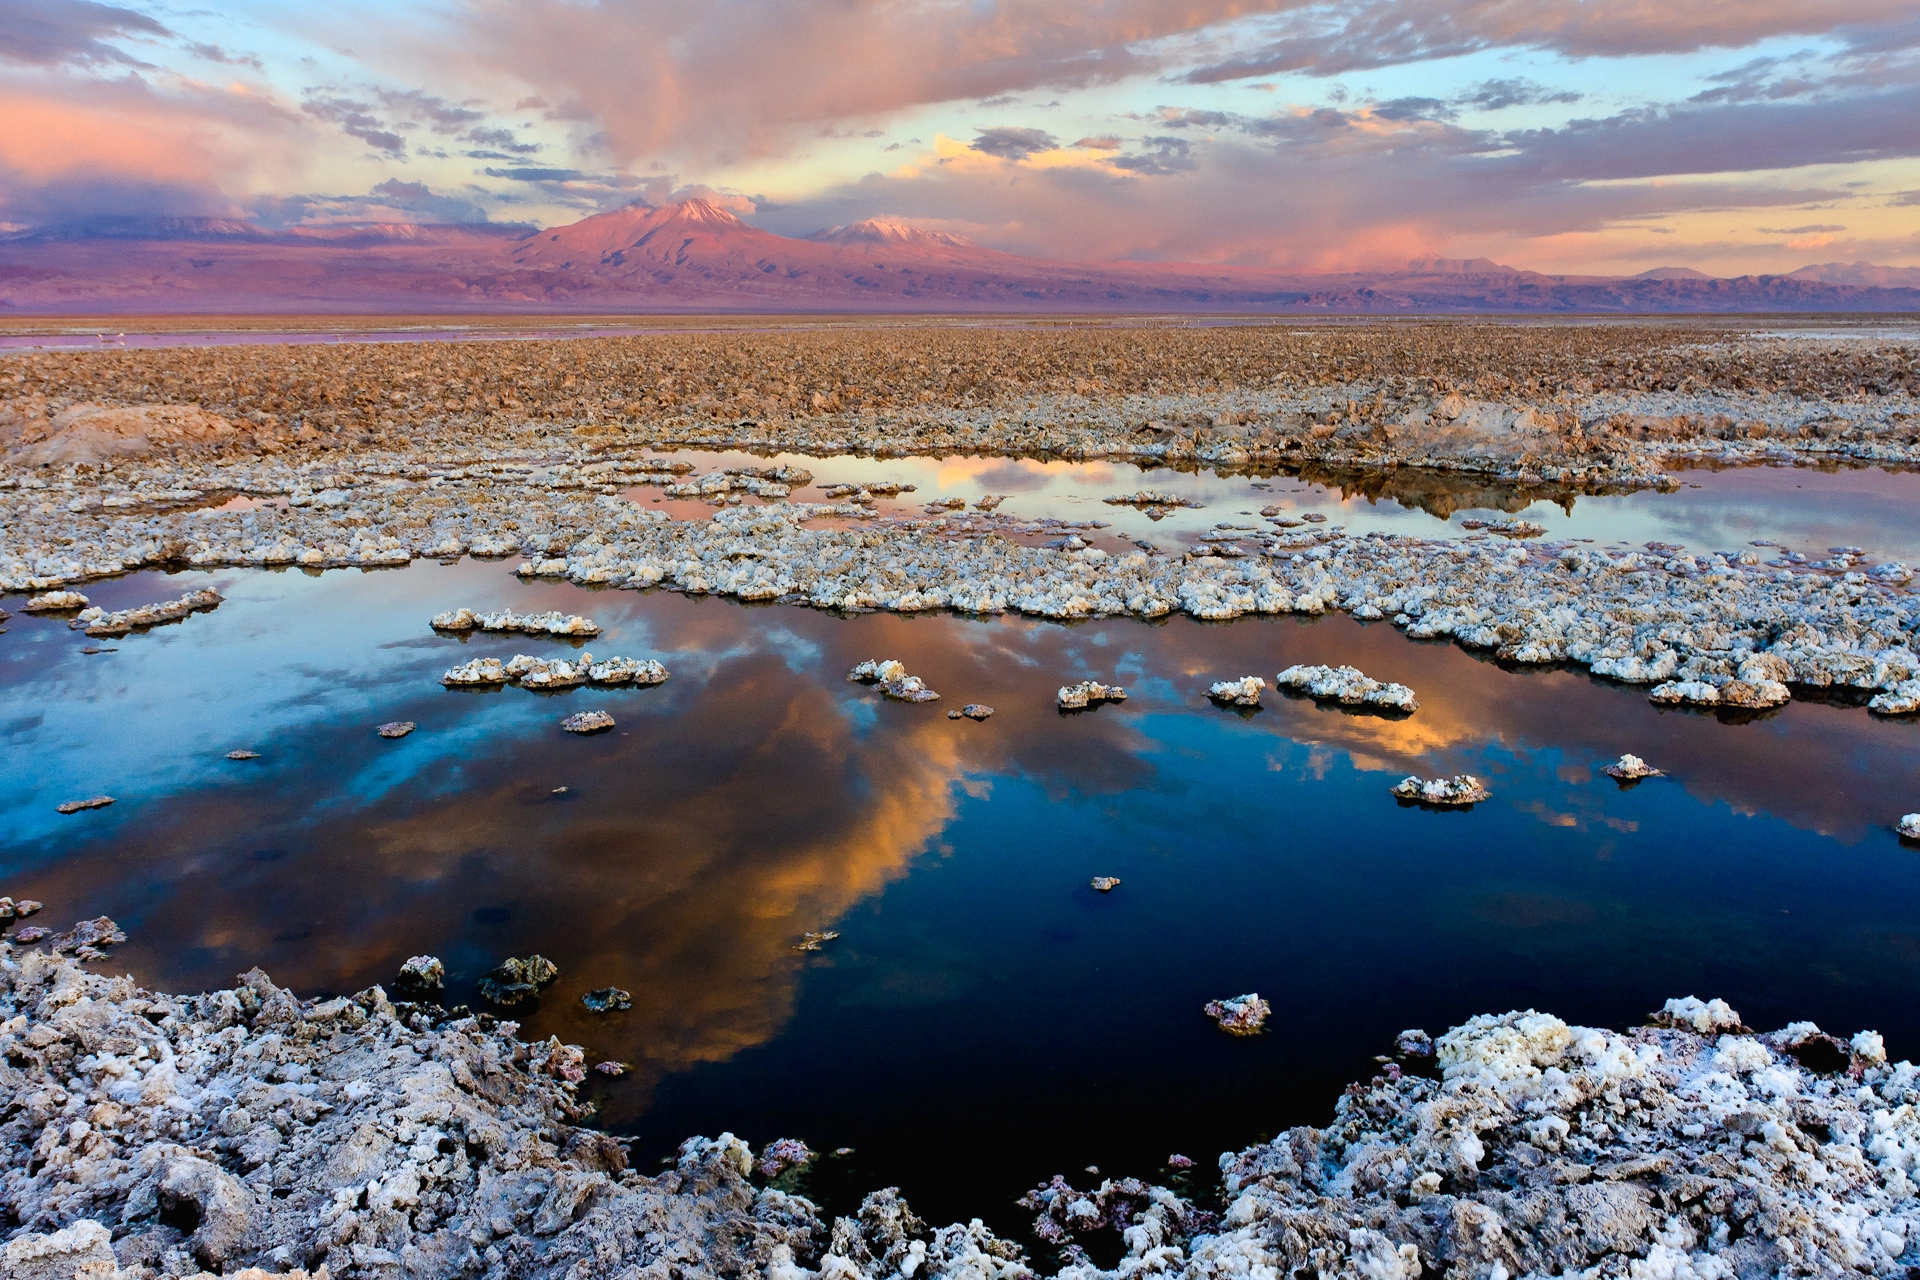 Chile's New Global Lithium Initiative